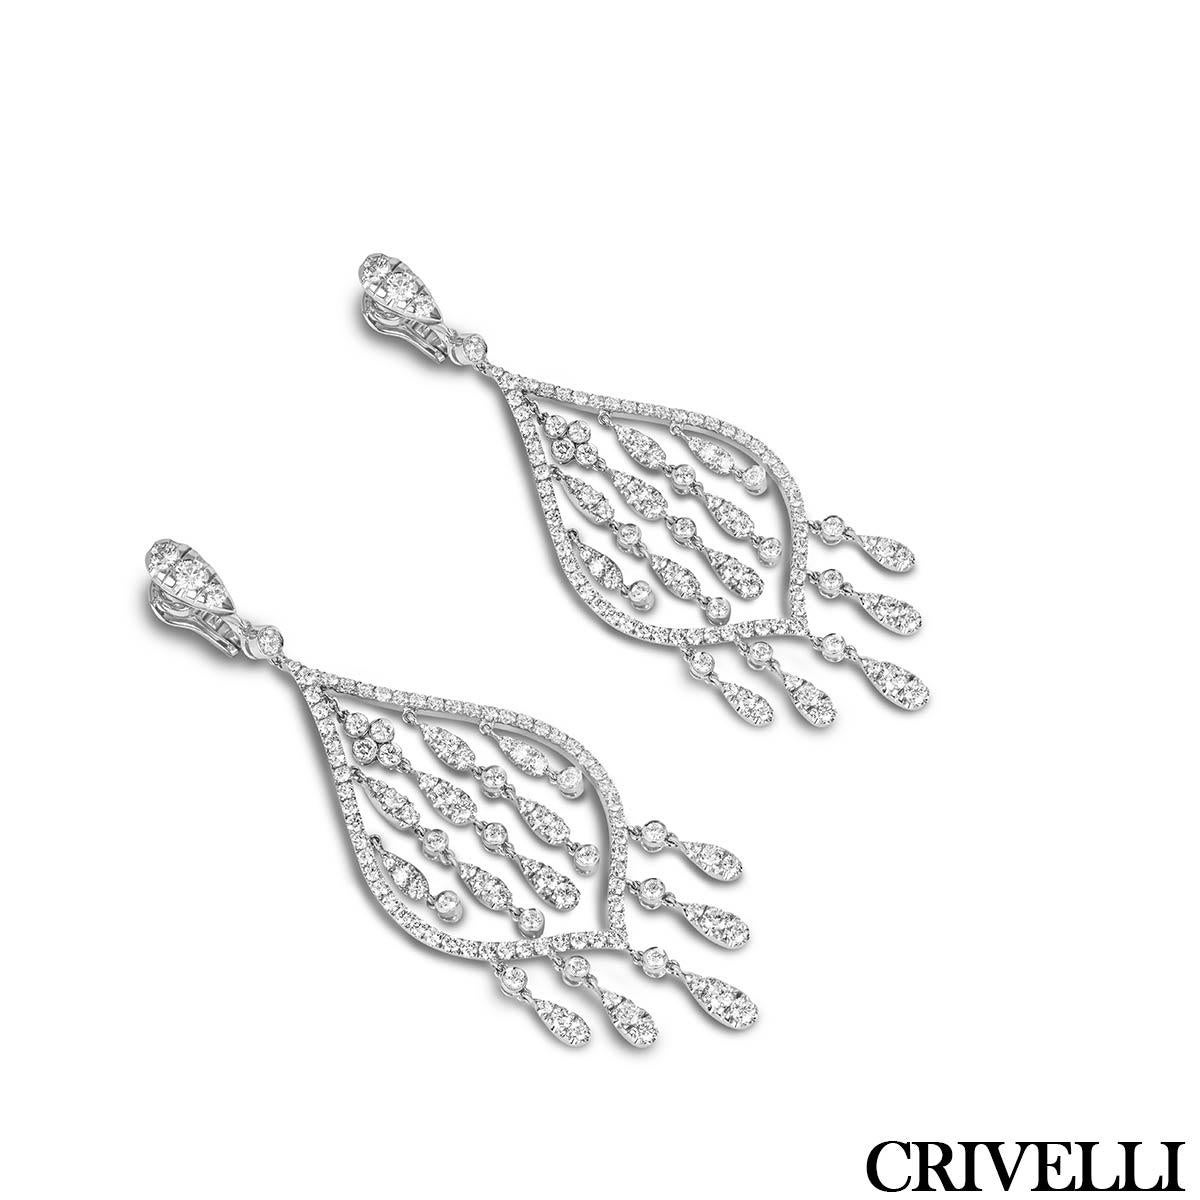 A magnificent pair of 18k white gold diamond earrings. The gorgeous chandelier design earrings are each adorned with 111 round brilliant cut diamonds with an approximate total weight of 7.30ct, E-F colour and VVS-VS clarity. The centre and bottom of